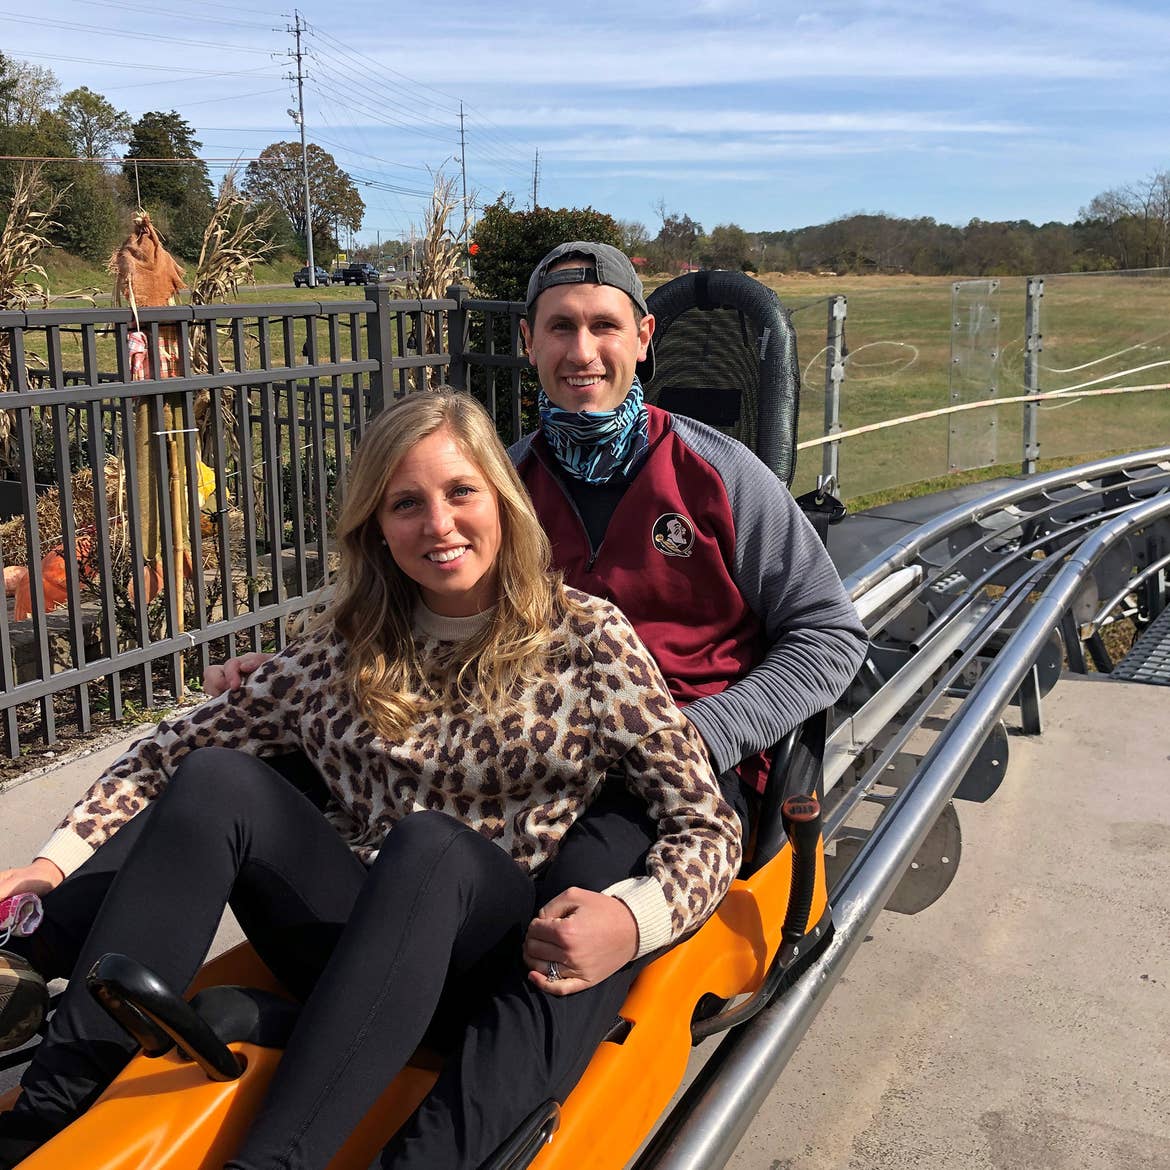 Tiffany (left) and her husband (right) seated in the Smoky Mountain Alpine Coaster in Gatlinburg, TN.